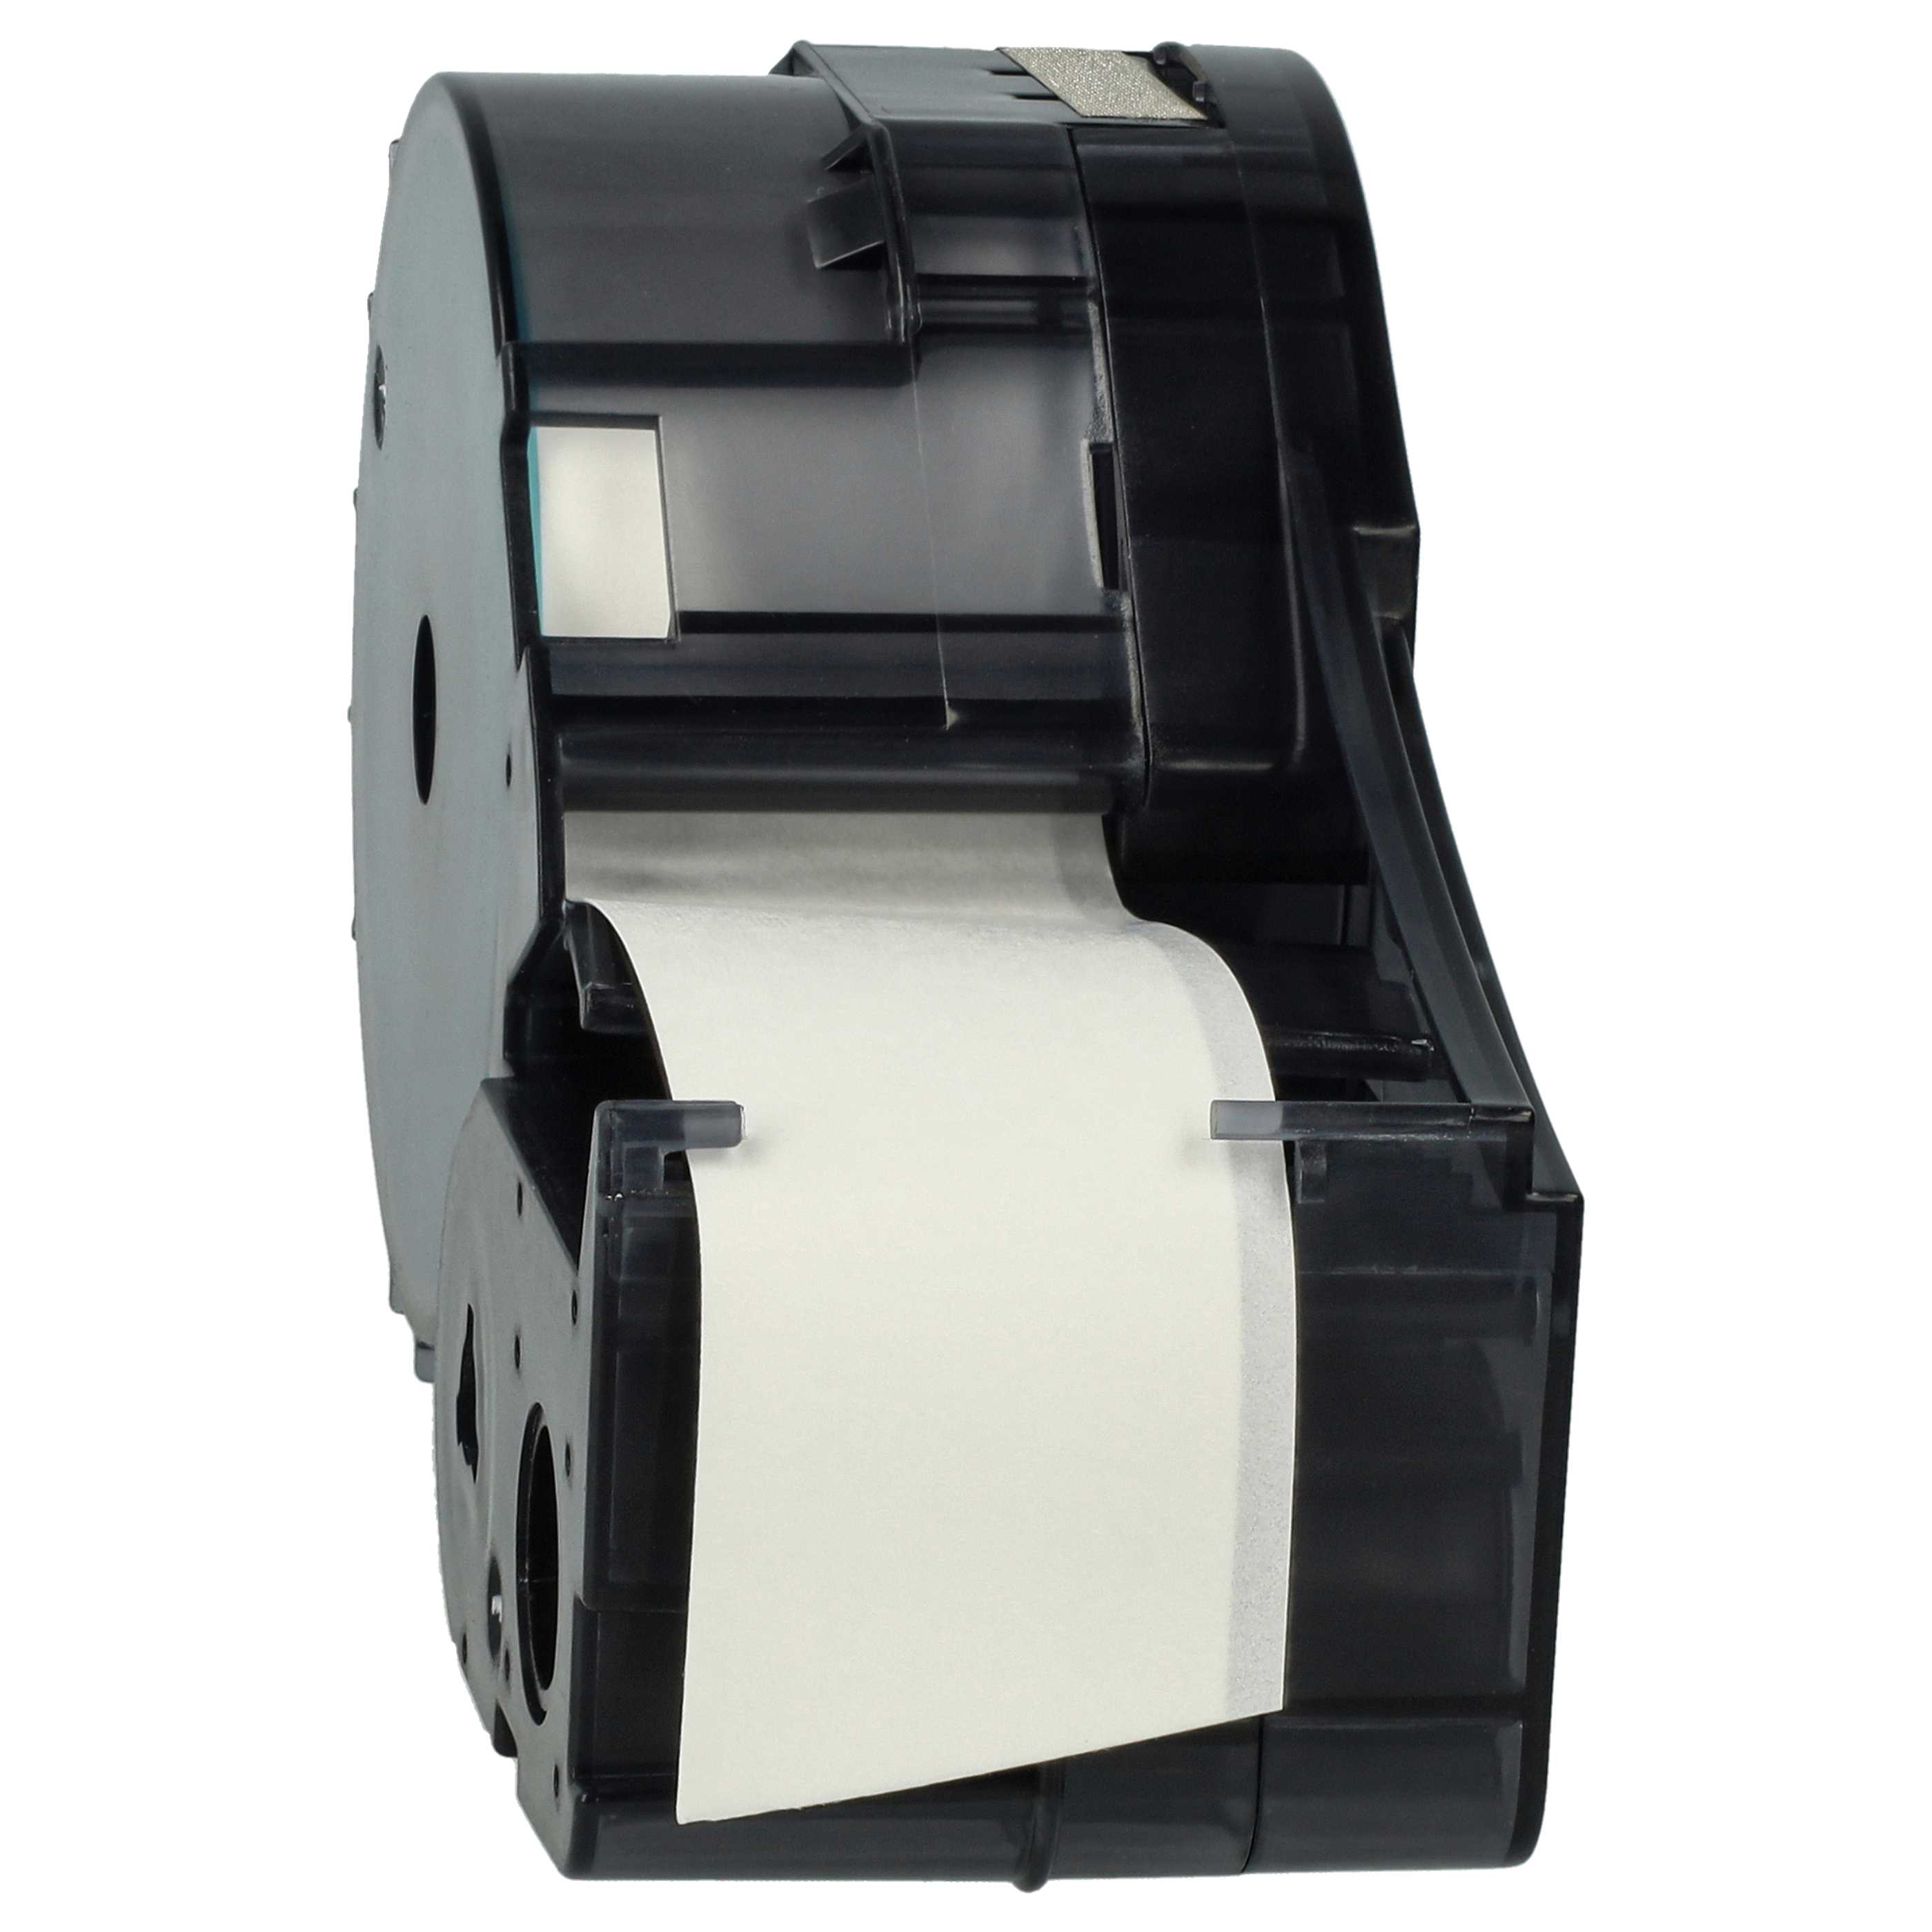 Label Tape as Replacement for Brady BM21-750-499 - 19.05 mm Black to White, nylon